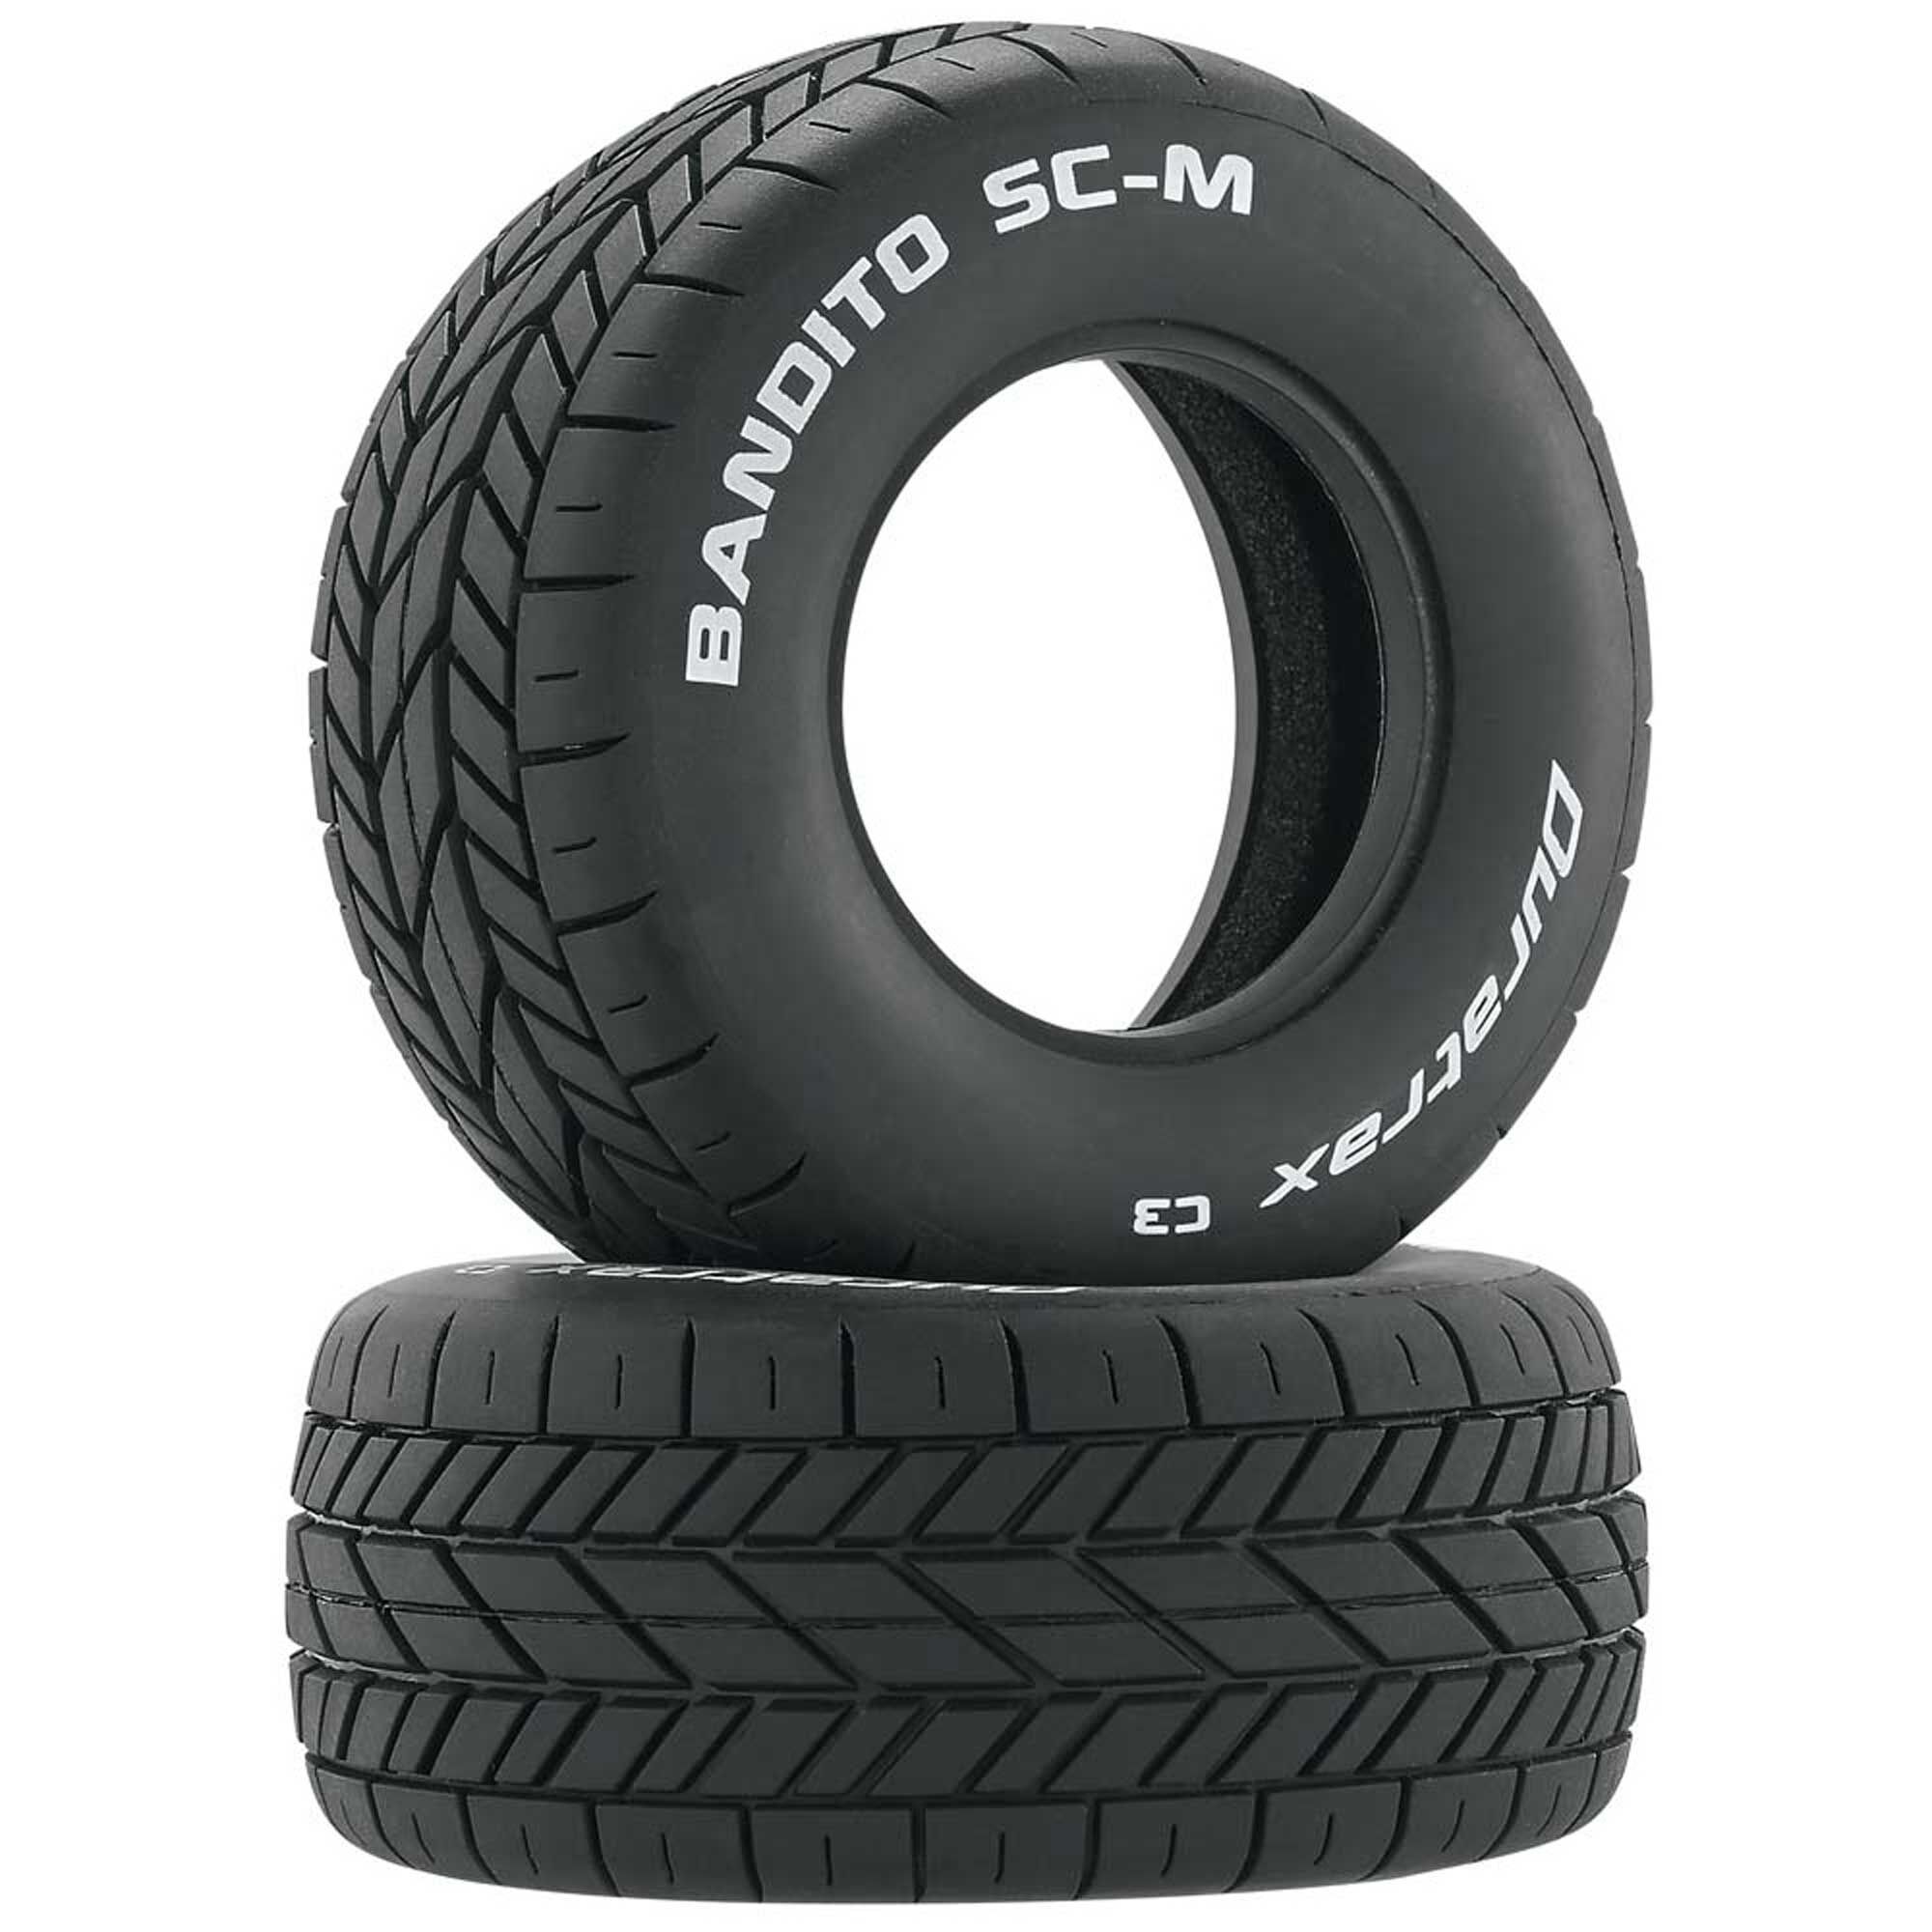 Bandito Sc-m Oval Tire C3 2 DTXC3801 Duratrax for sale online 